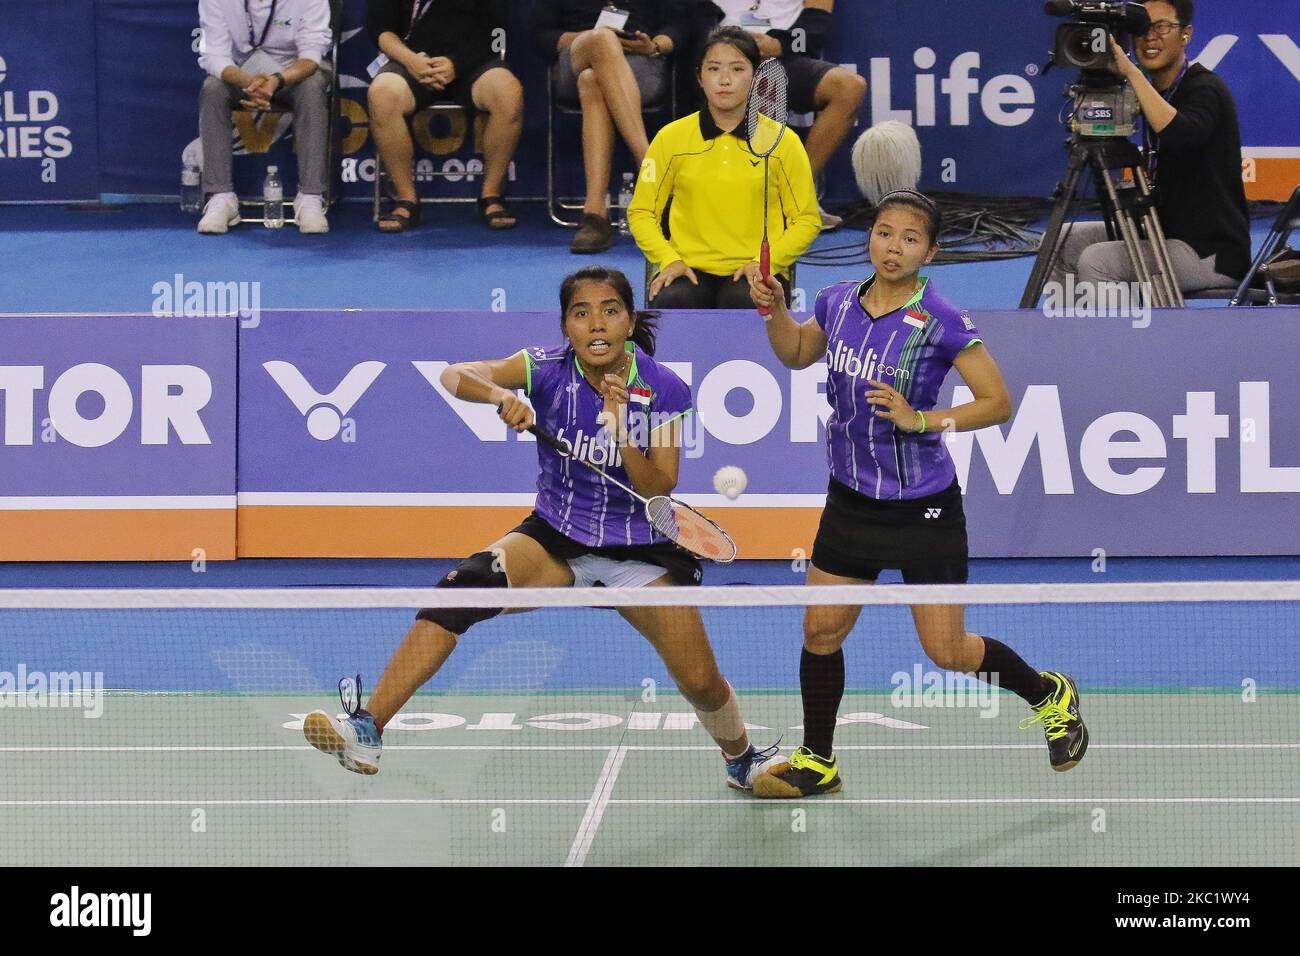 South Korea's Chang Ye Na and her teammate Lee So Hee play match during their women's double final match against Indonesia's Nitya Krishinda Maheswari and Greysia Polii at the Victor Korea Open Badminton final in Seoul, South Korea. Indonesia's Nitya and Greysia won the match score 2-0. (Photo by Seung-il Ryu/NurPhoto) Stock Photo